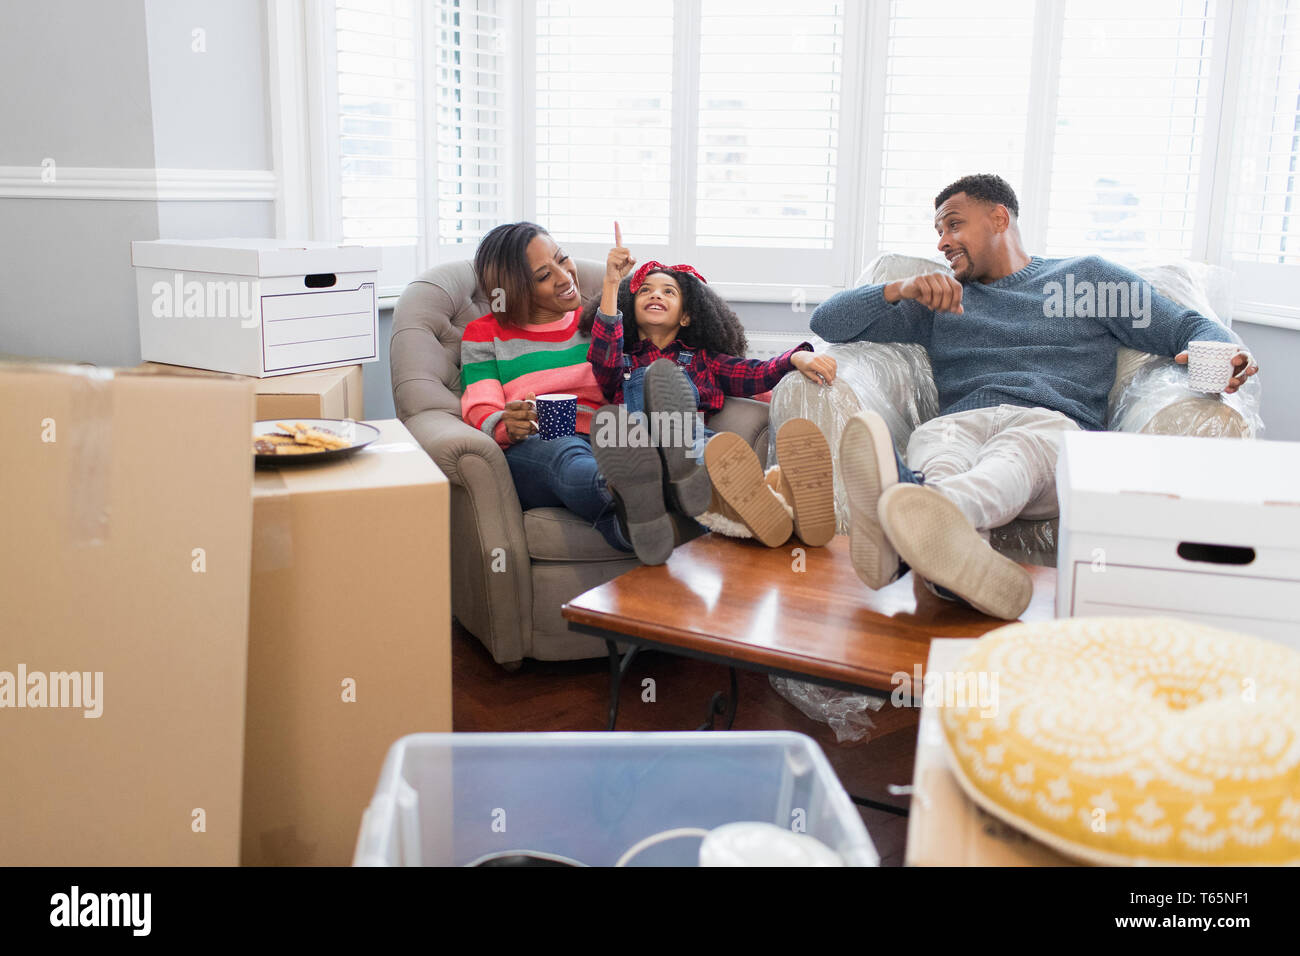 Family taking a break from moving house Stock Photo